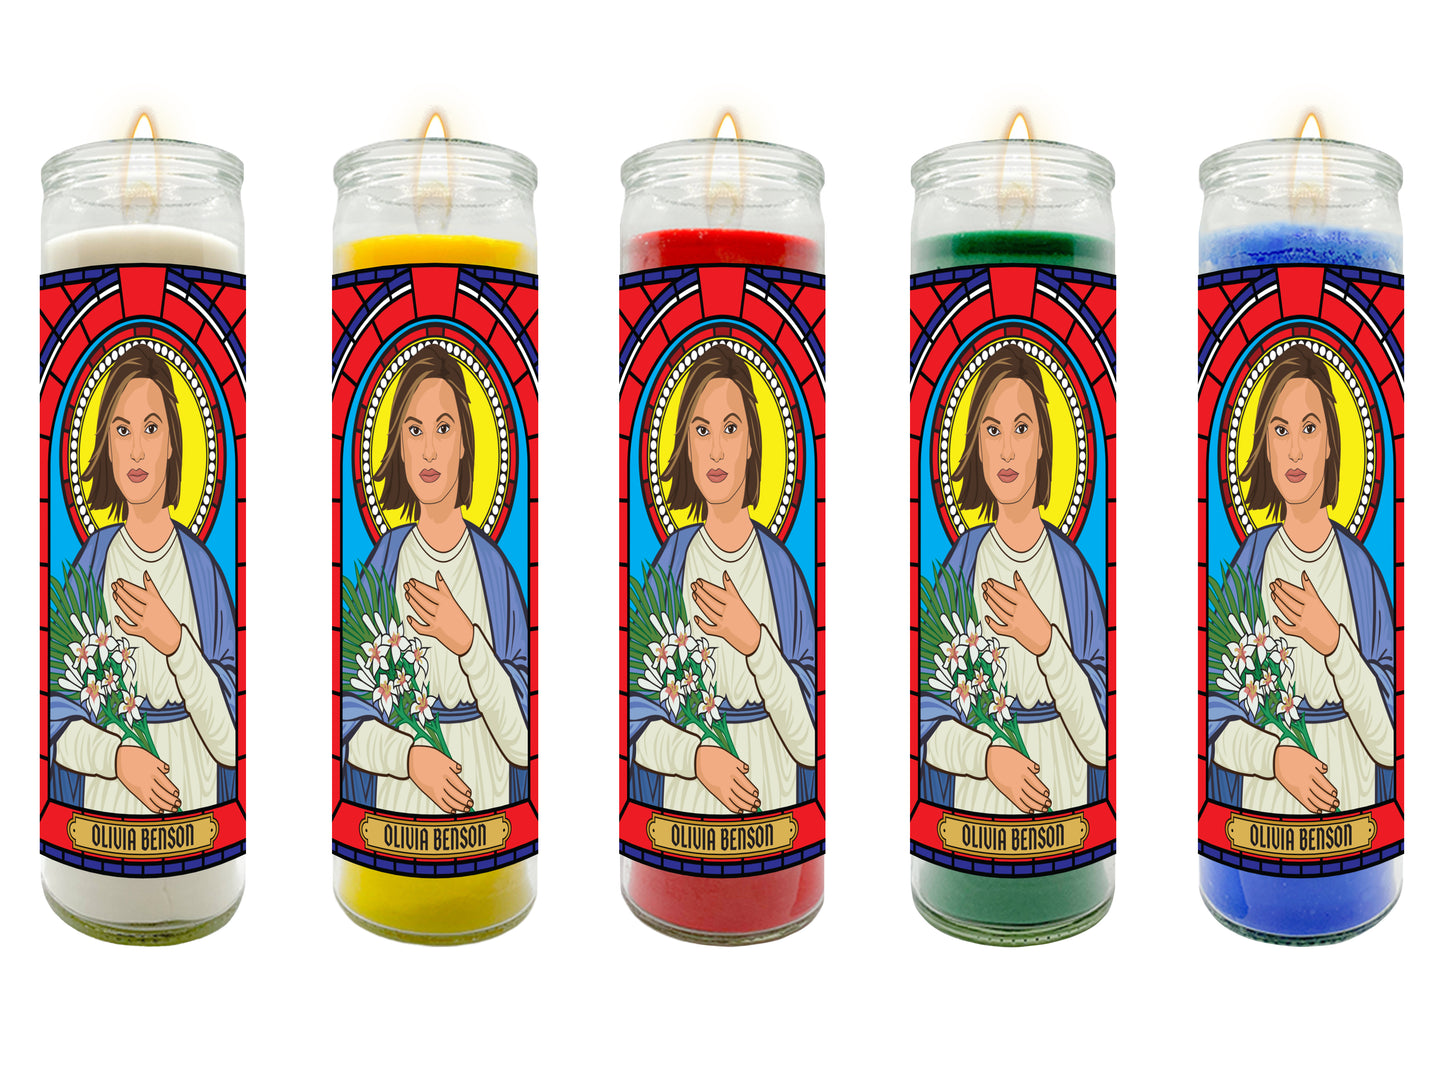 Law and Order SVU Elliot and Olivia Illustrated Prayer Candle Set